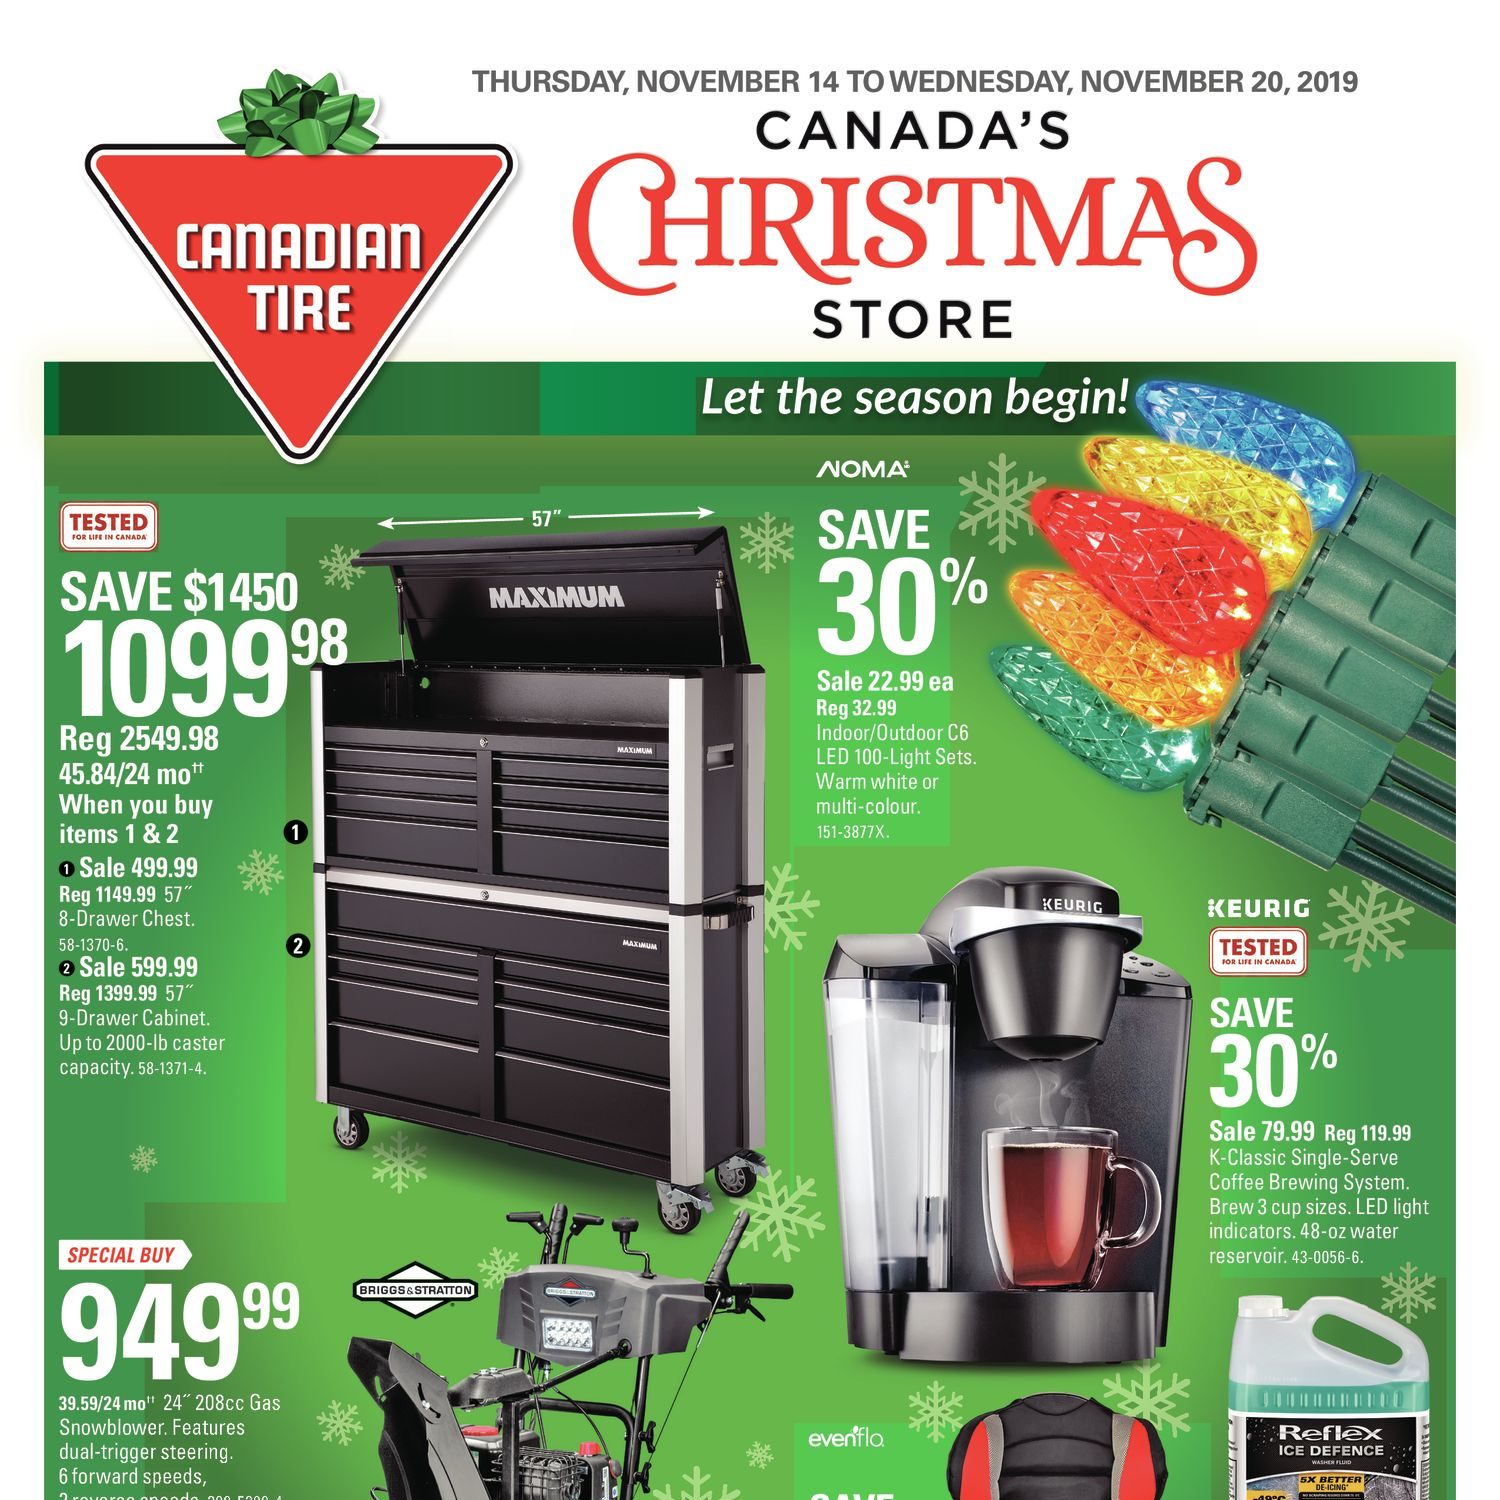 Canadian Tire Weekly Flyer Weekly Canada's Christmas Store Nov 14